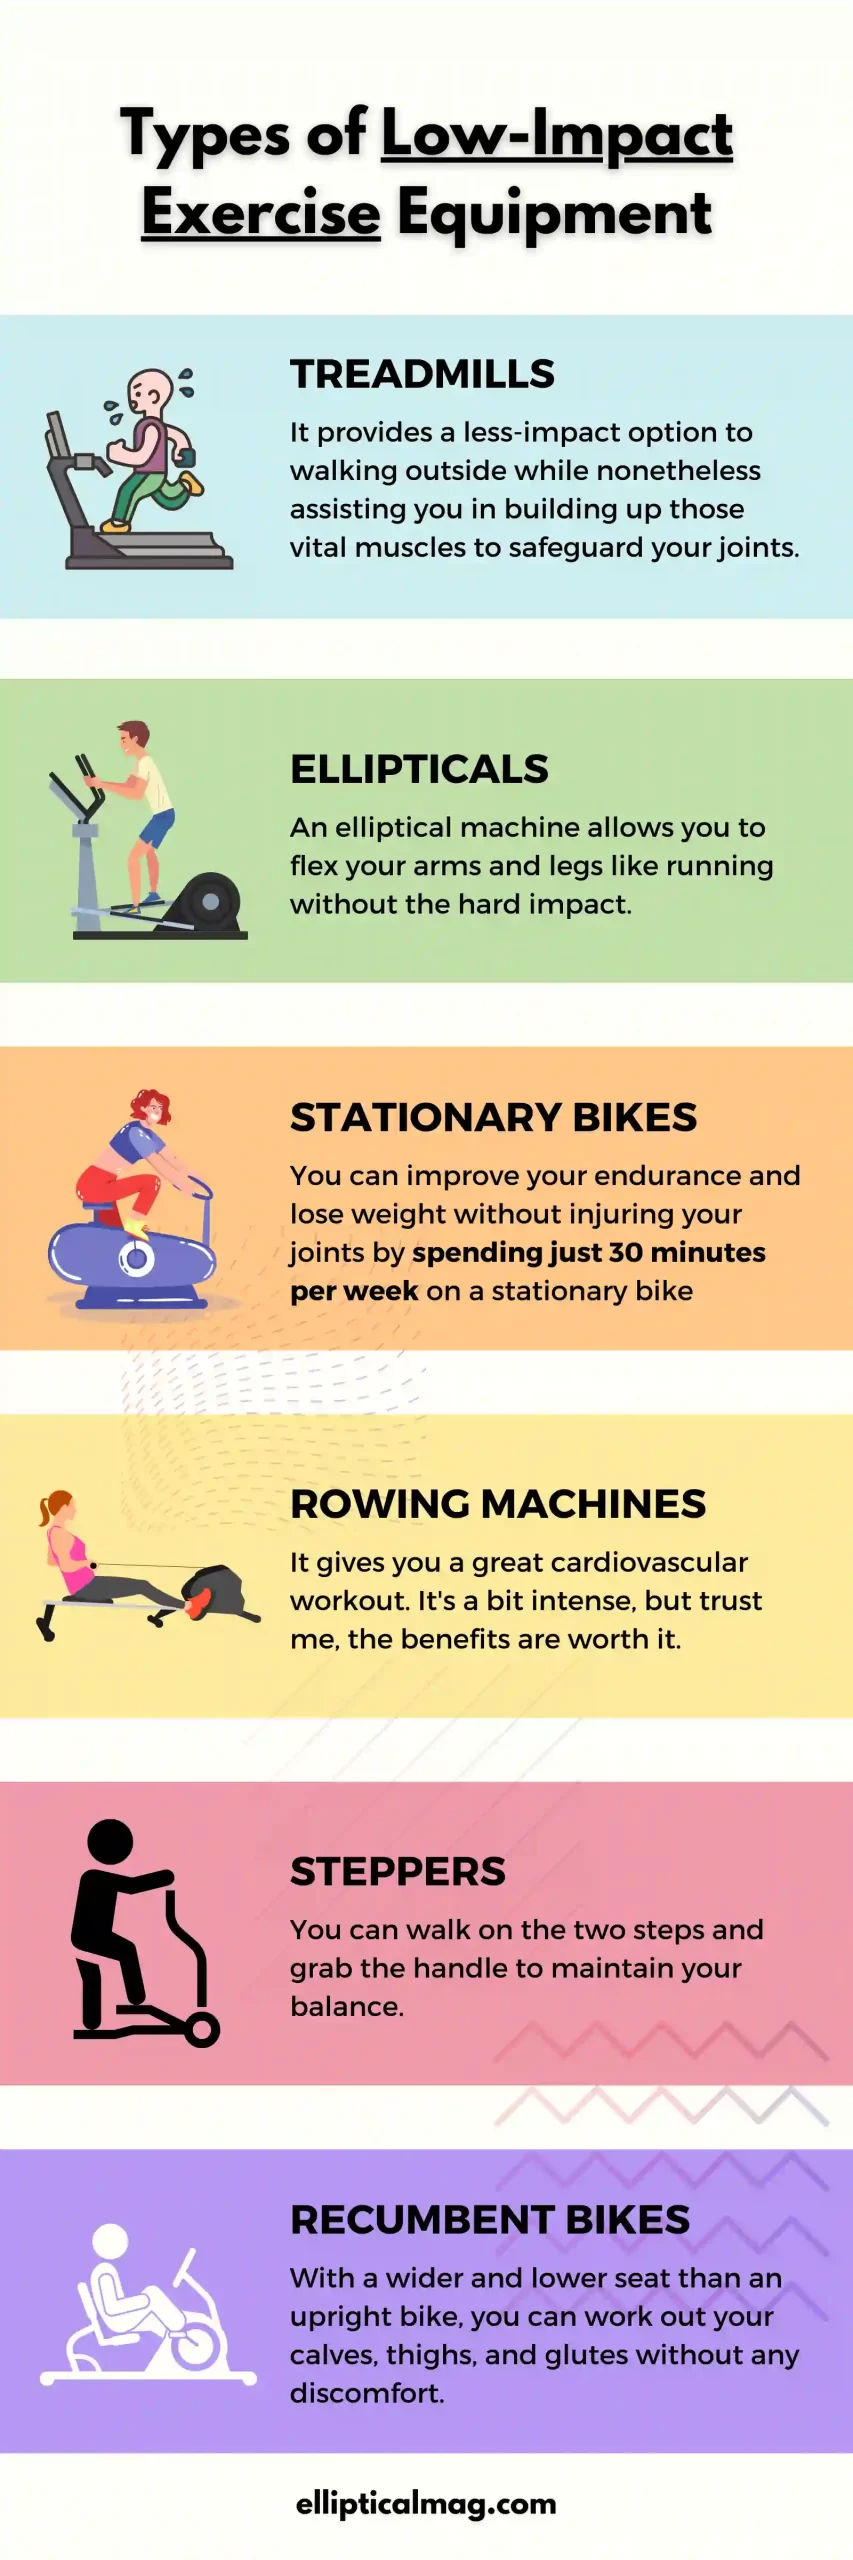 Types of Low-Impact Exercise Equipment